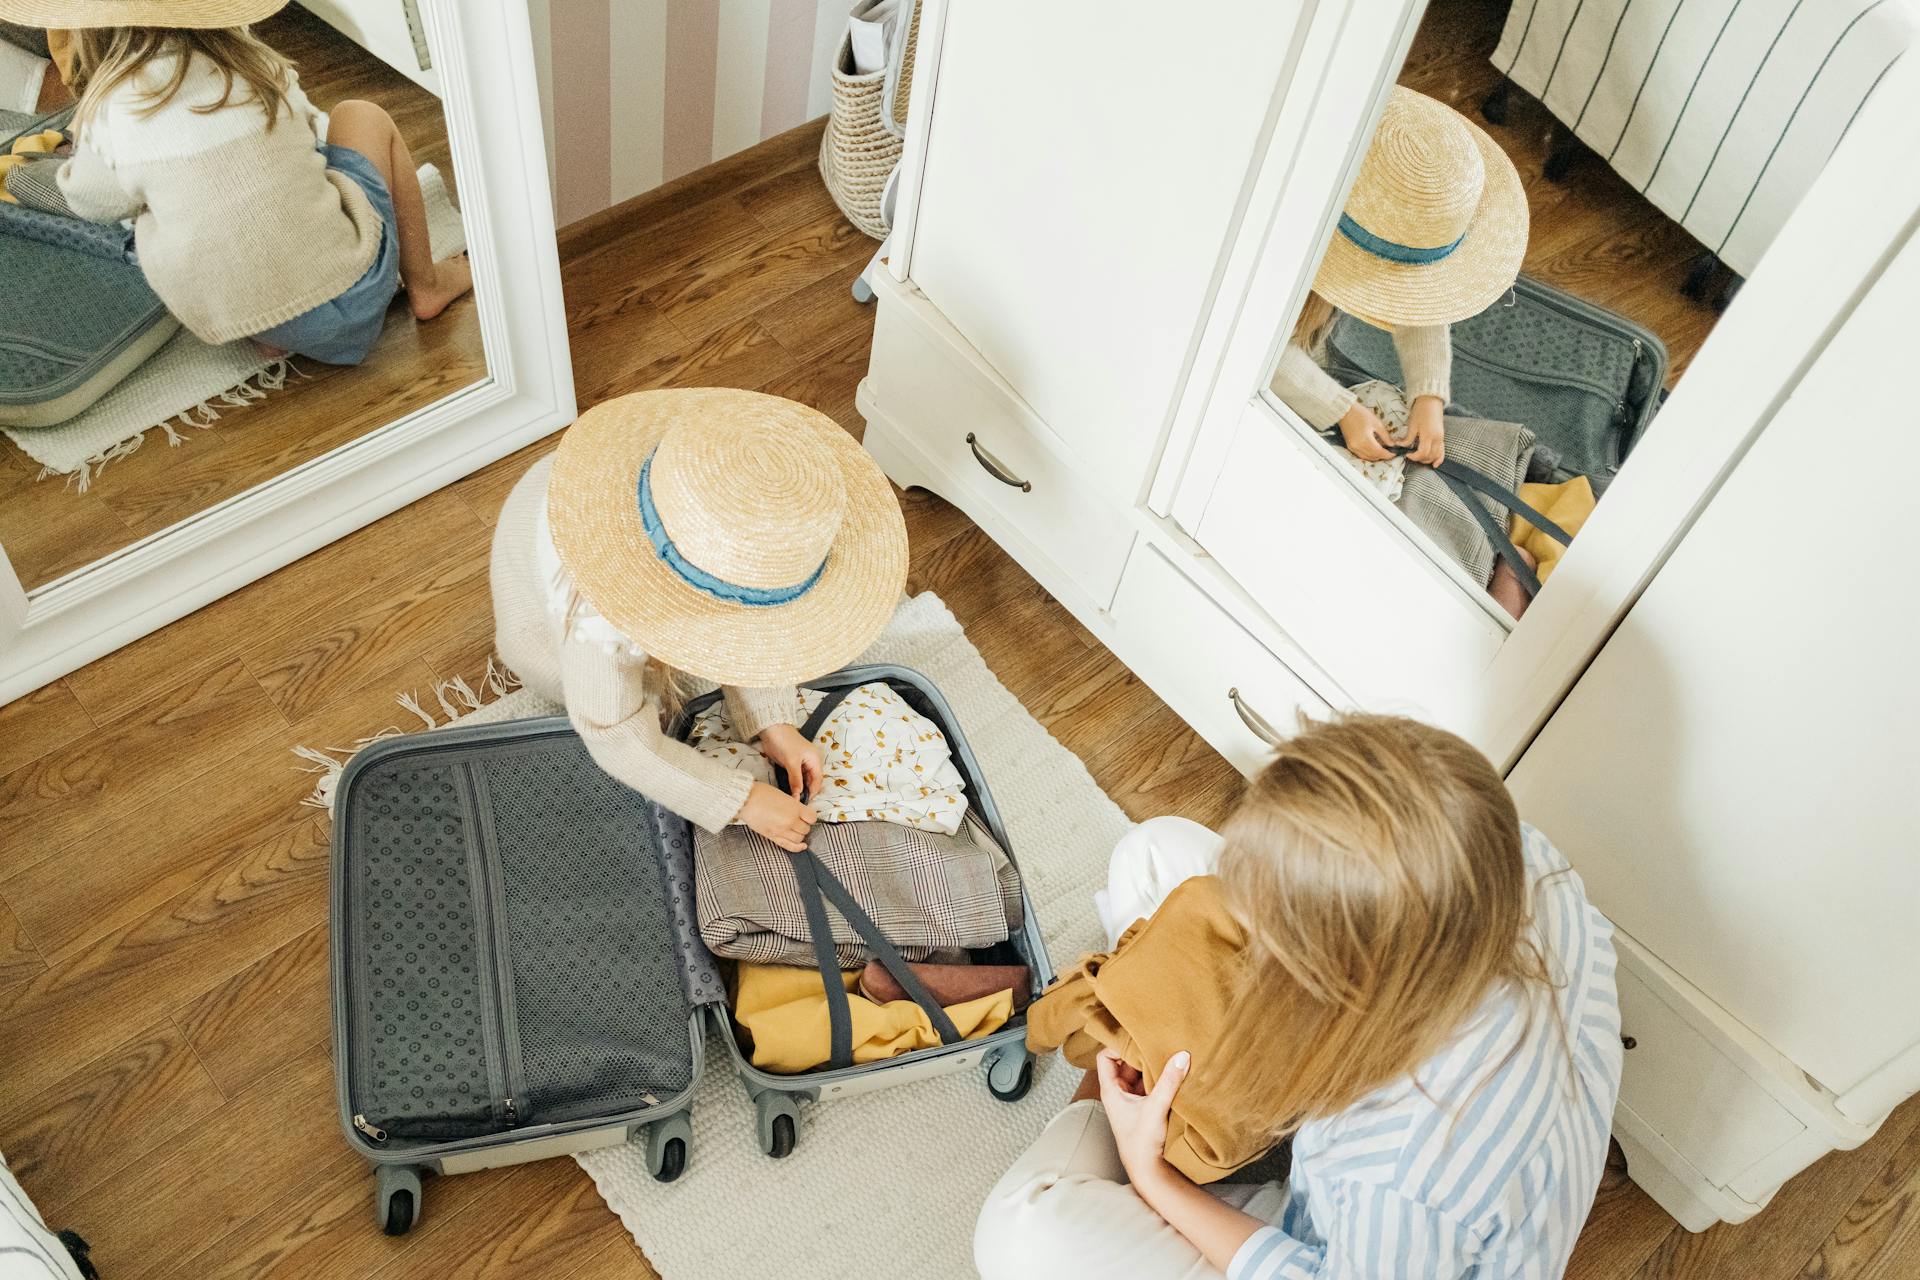 A woman and child packing a suitcase | Source: Pexels